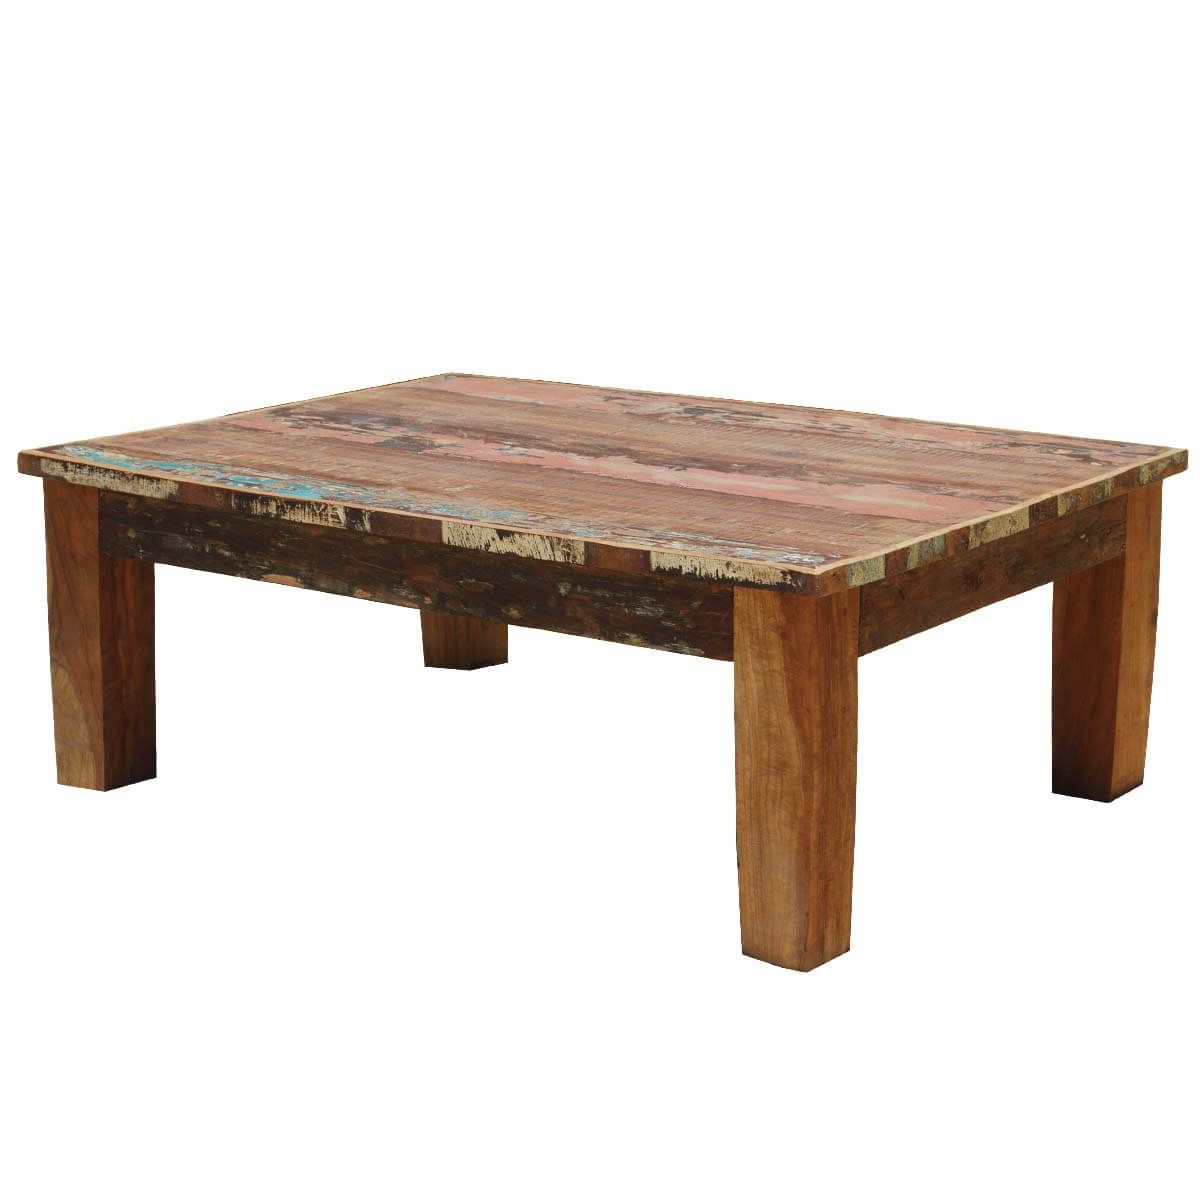 Well Liked Culbertson Rustic Reclaimed Wood Rectangle Coffee Table Intended For Barnwood Coffee Tables (View 12 of 20)